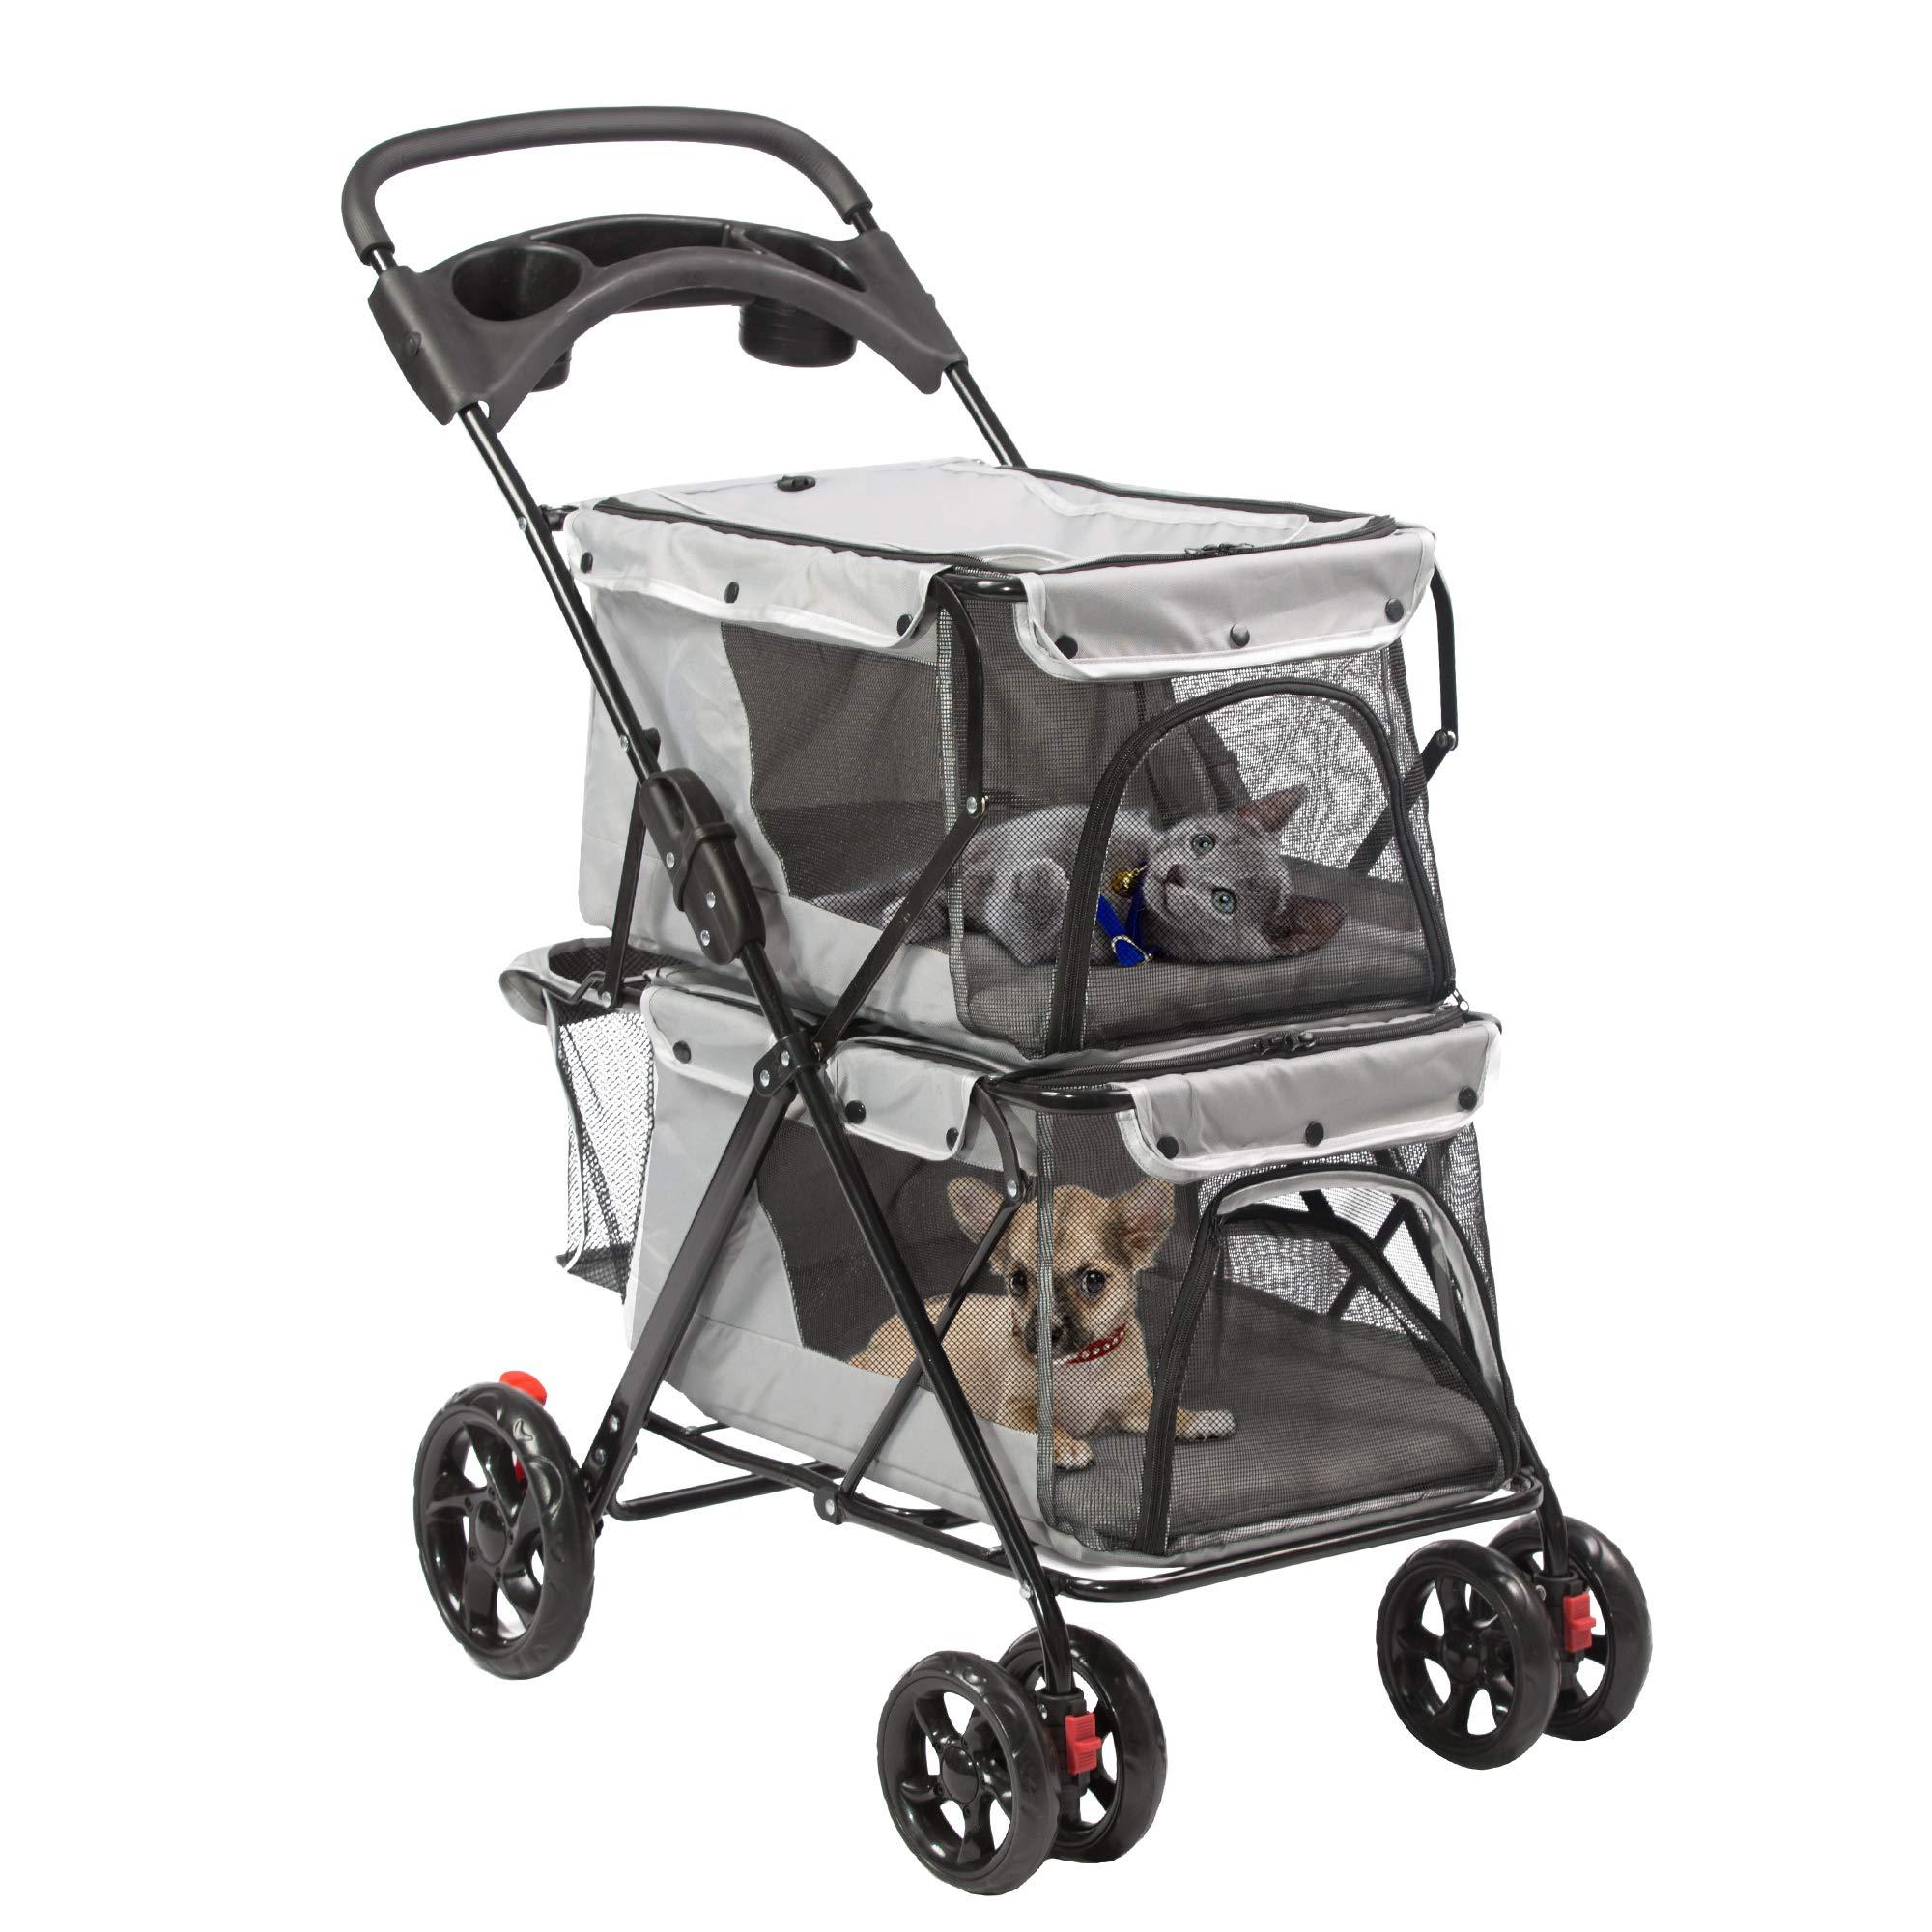 Koreyosh 4 Wheels Pet Stroller Dog Stroller Cat Stroller for Small Pets Puppies and Kitty Double Deck Folding Pet Stroller,Great for Twin or Multiple Pet Travel